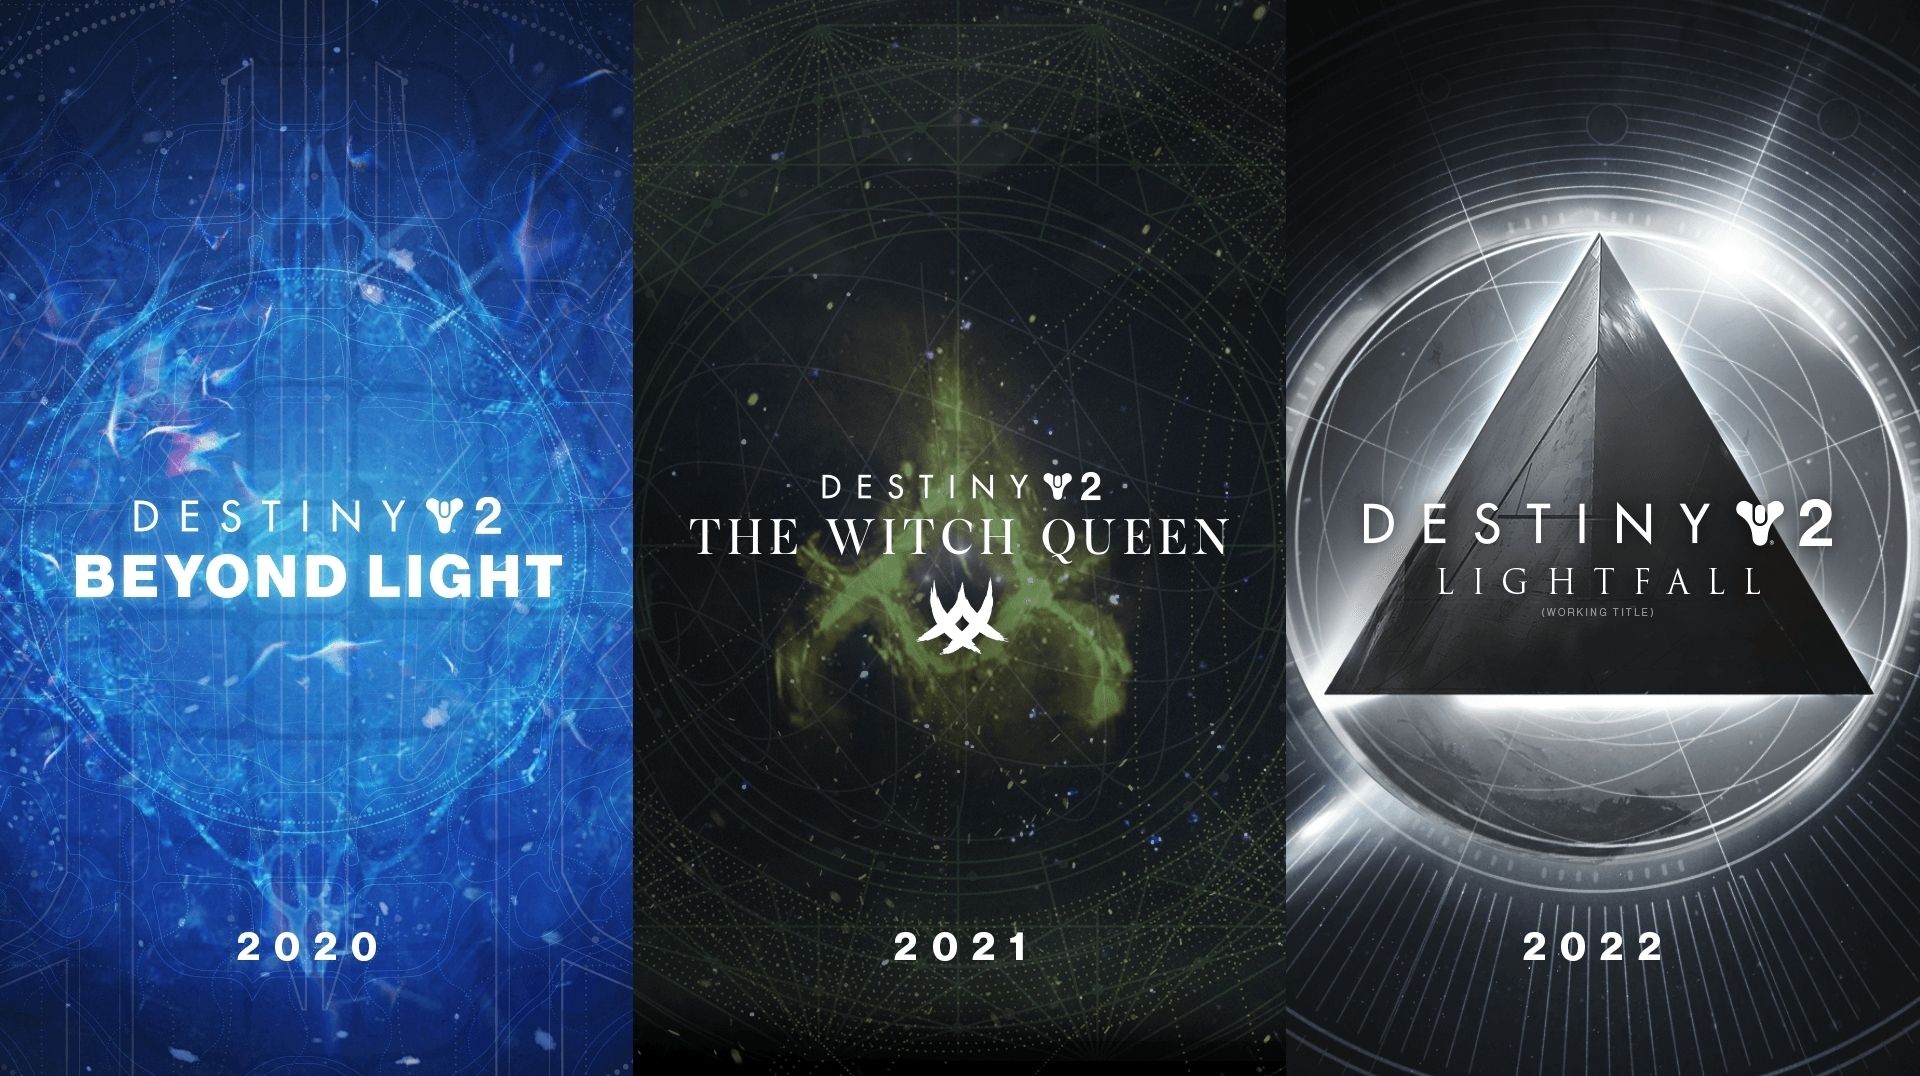 What’s New to Destiny 2 in 2021?